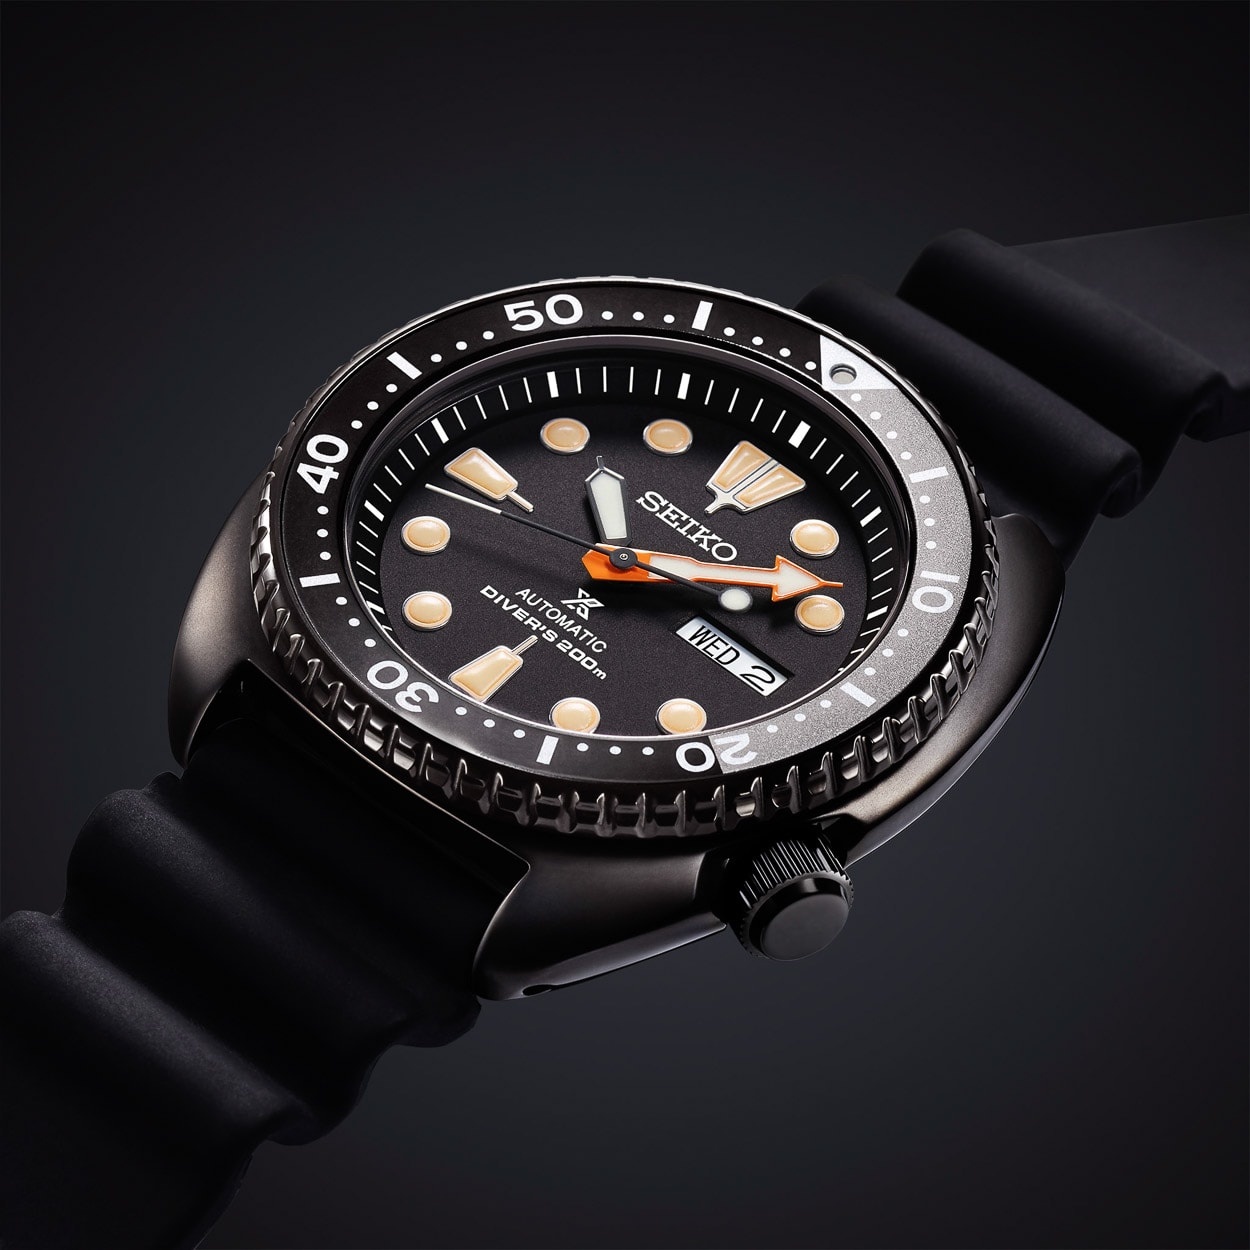 Hands-on with the Seiko Prospex SRPC49 Black Series Diver